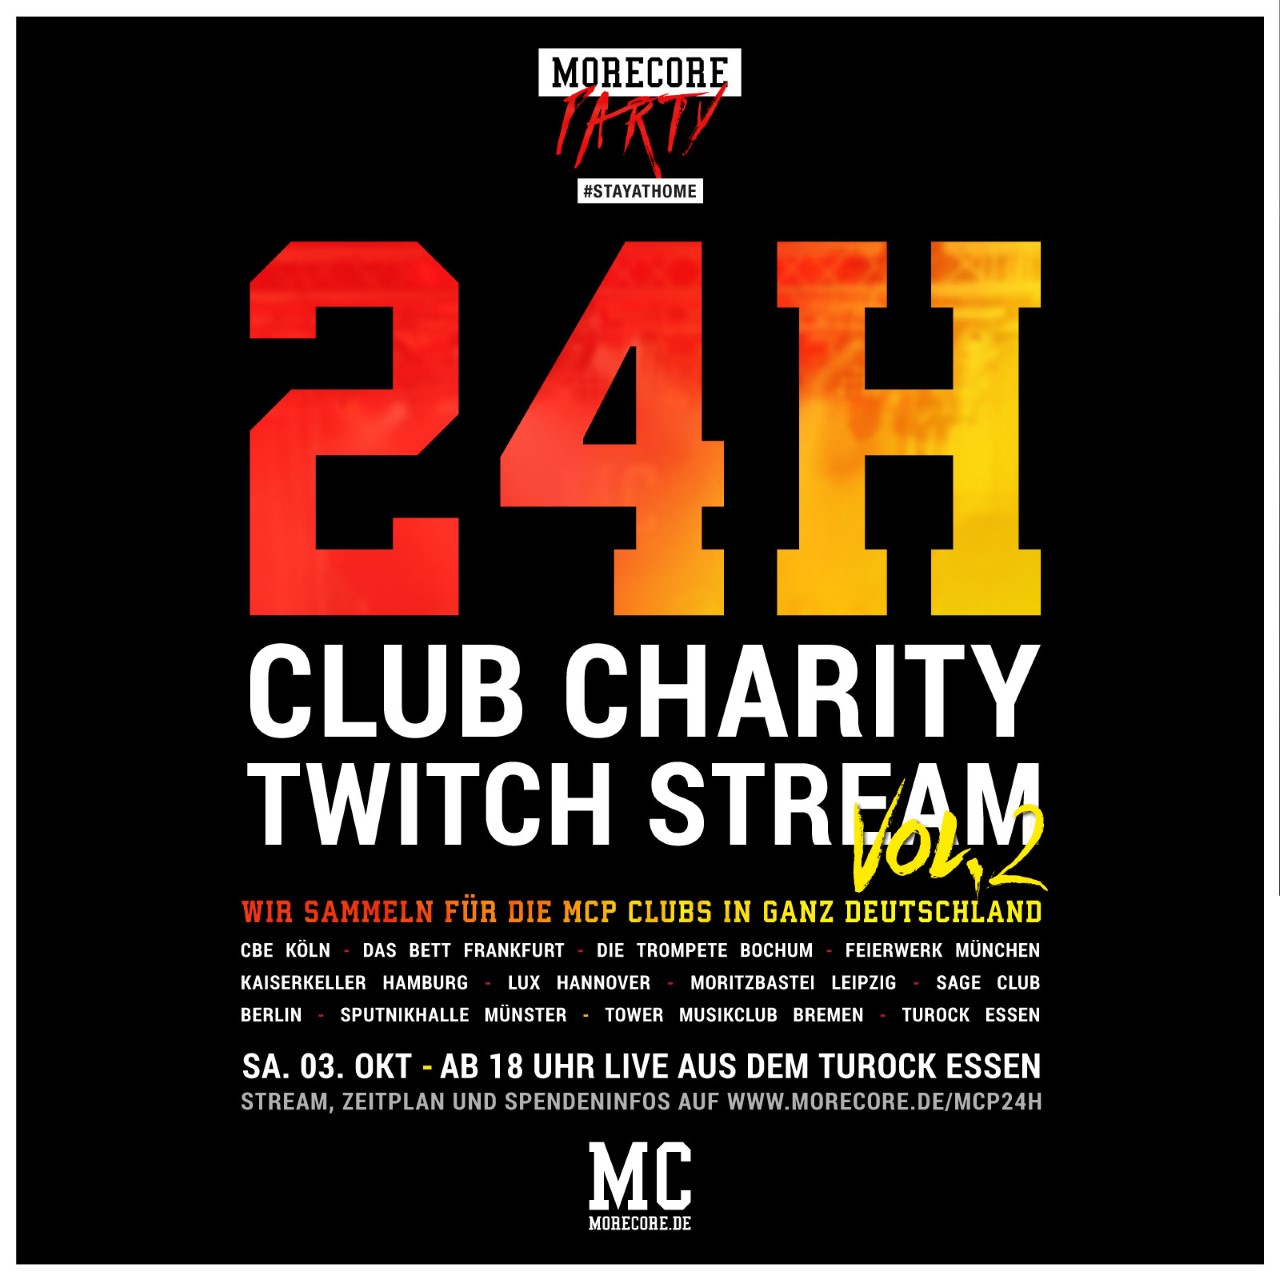 MORECORE PARTY 24 H Club Charity Twitch Stream